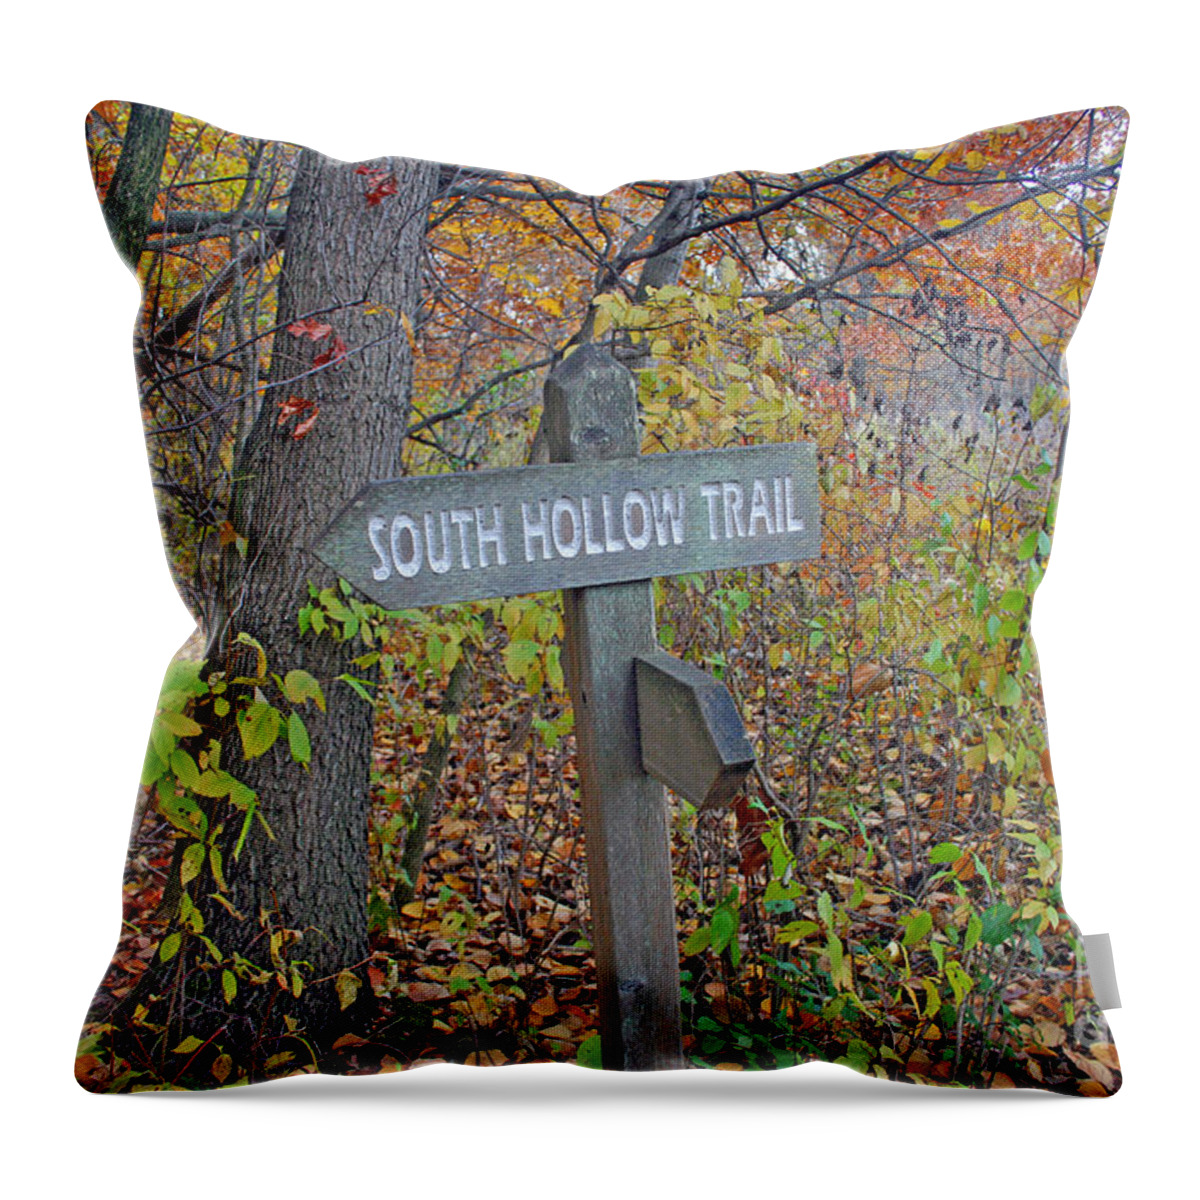 South Hollow Trail Throw Pillow featuring the photograph South Hollow Trail by Kay Novy